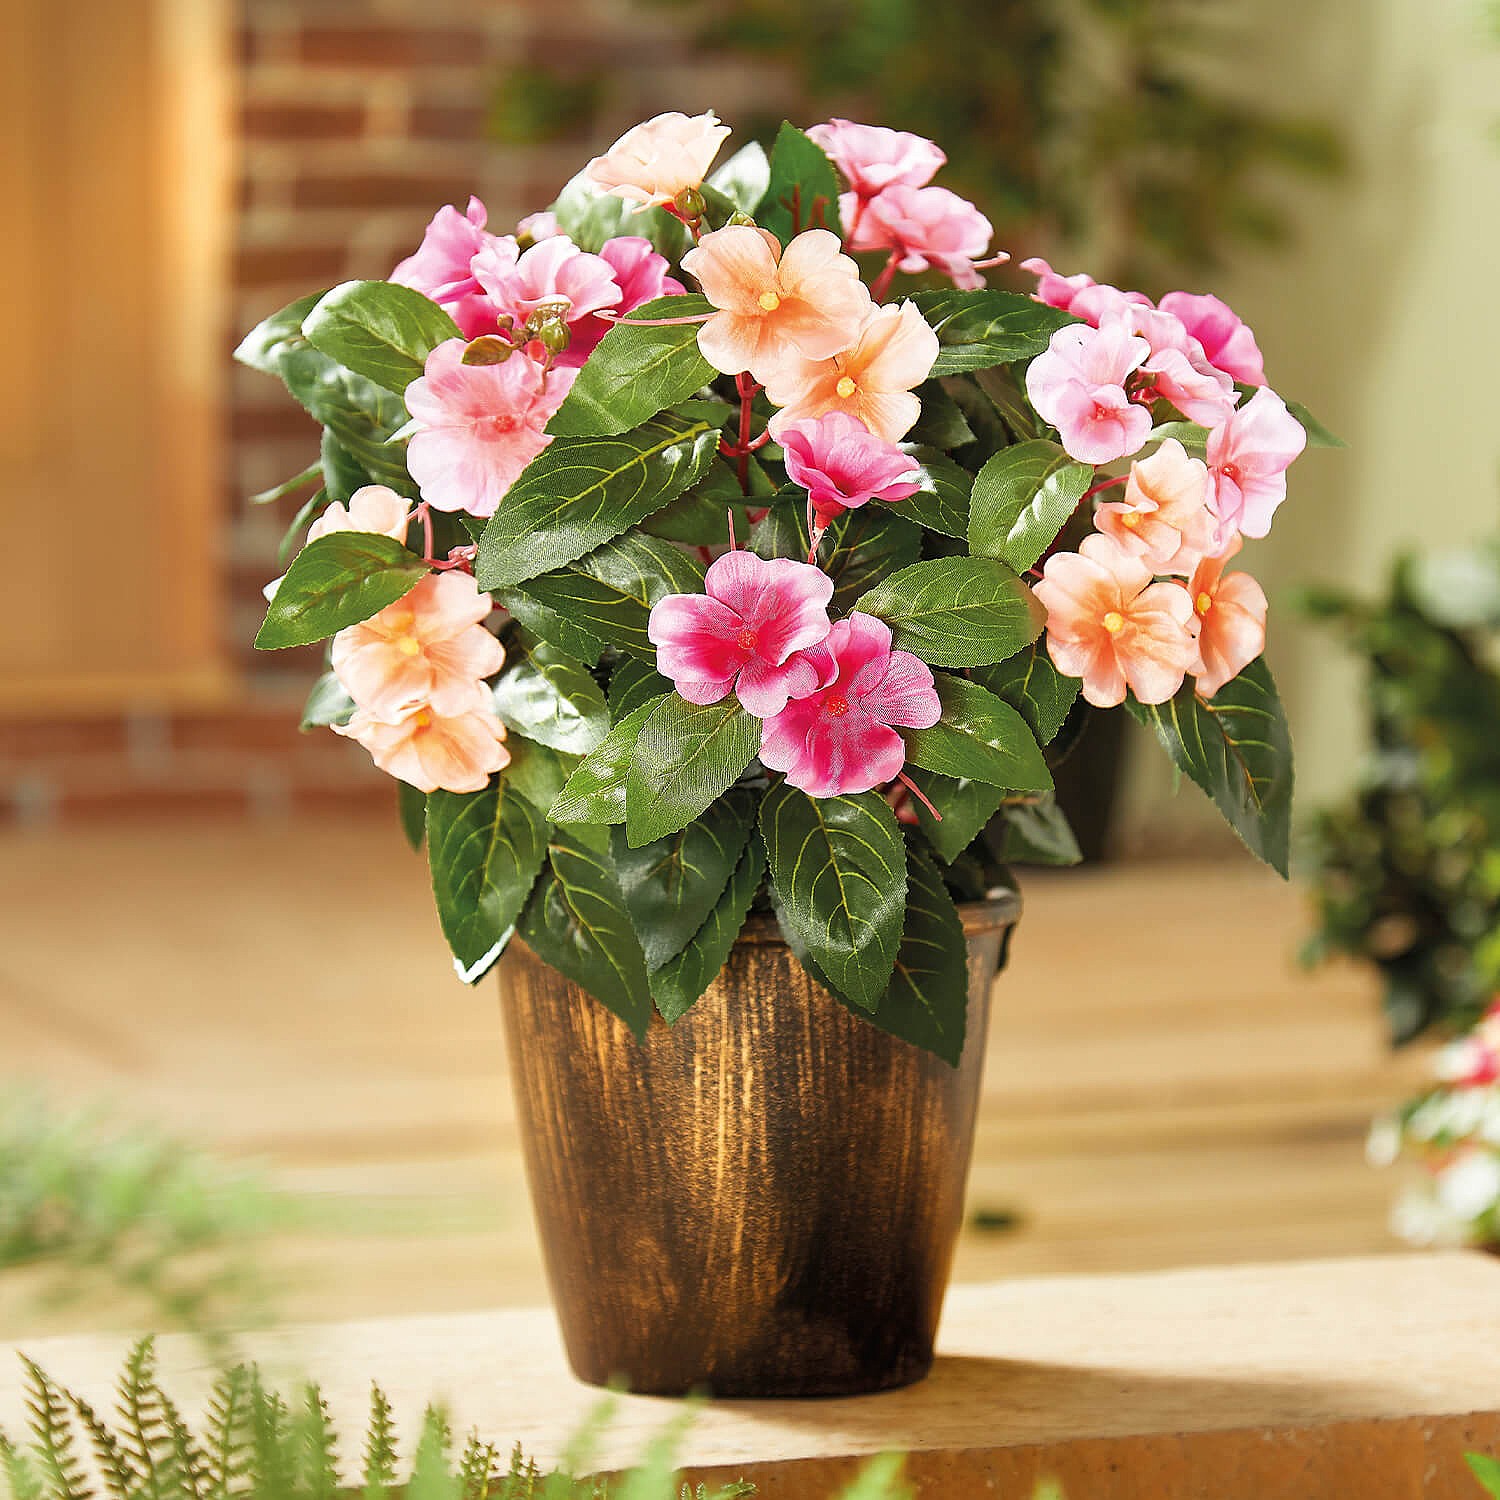 Potted Artificial Impatiens - Buy 2 Get 1 Free